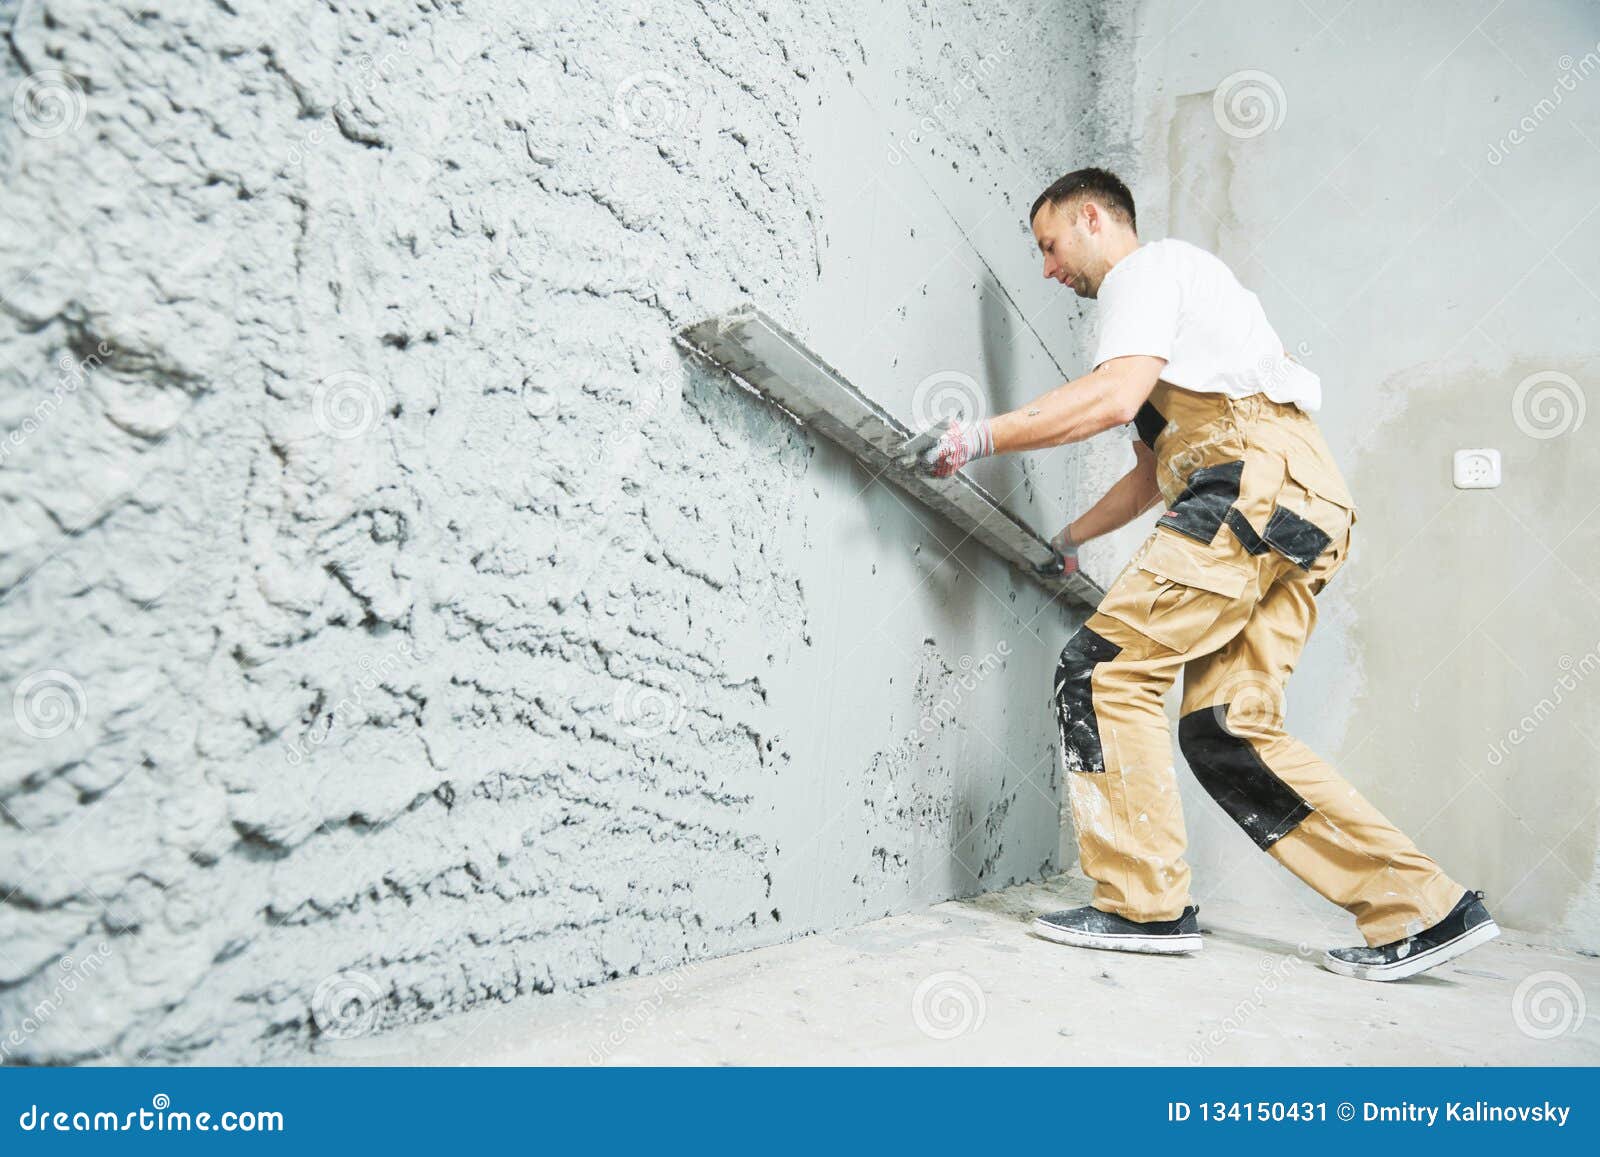 plasterer using screeder smoothing putty plaster mortar on wall